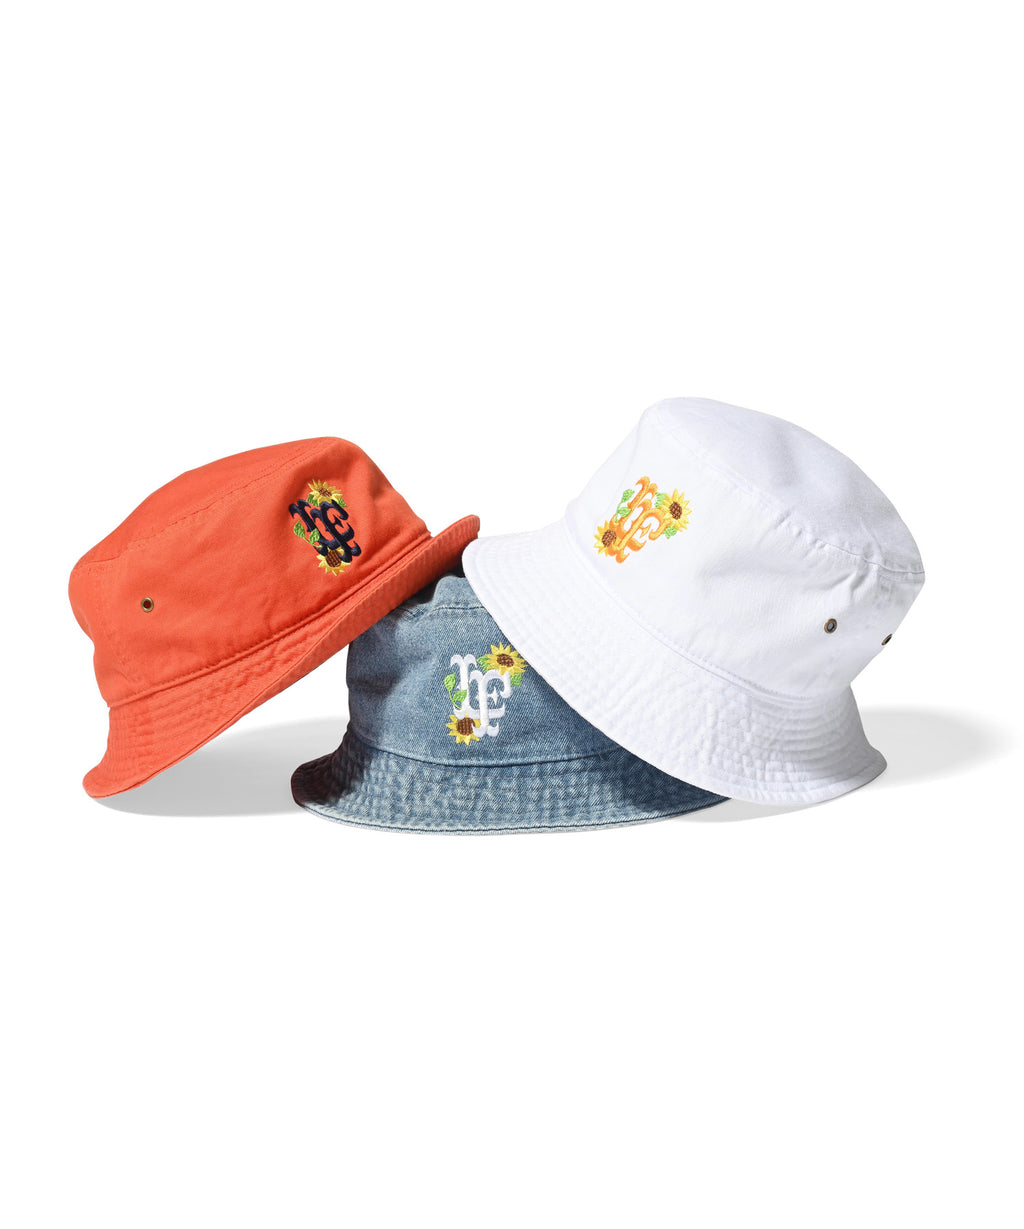 Online shopping for HATS | LFYT OFFICIAL SITE – Page 2